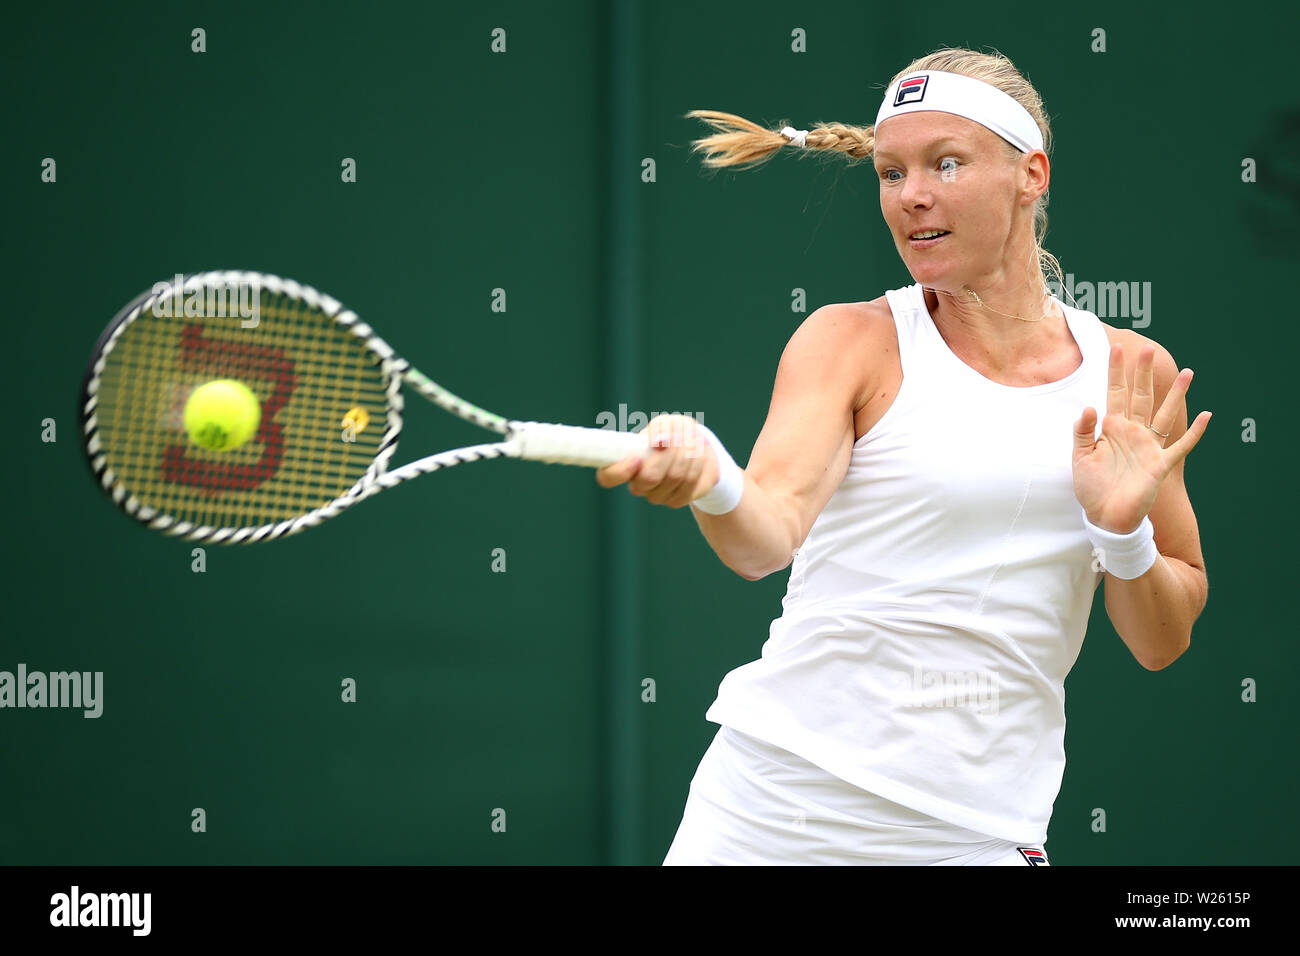 Kiki Bertens in action against Barbora Strycova (not pictured) on day six of the Wimbledon Championships at the All England Lawn Tennis and Croquet Club, Wimbledon. Stock Photo